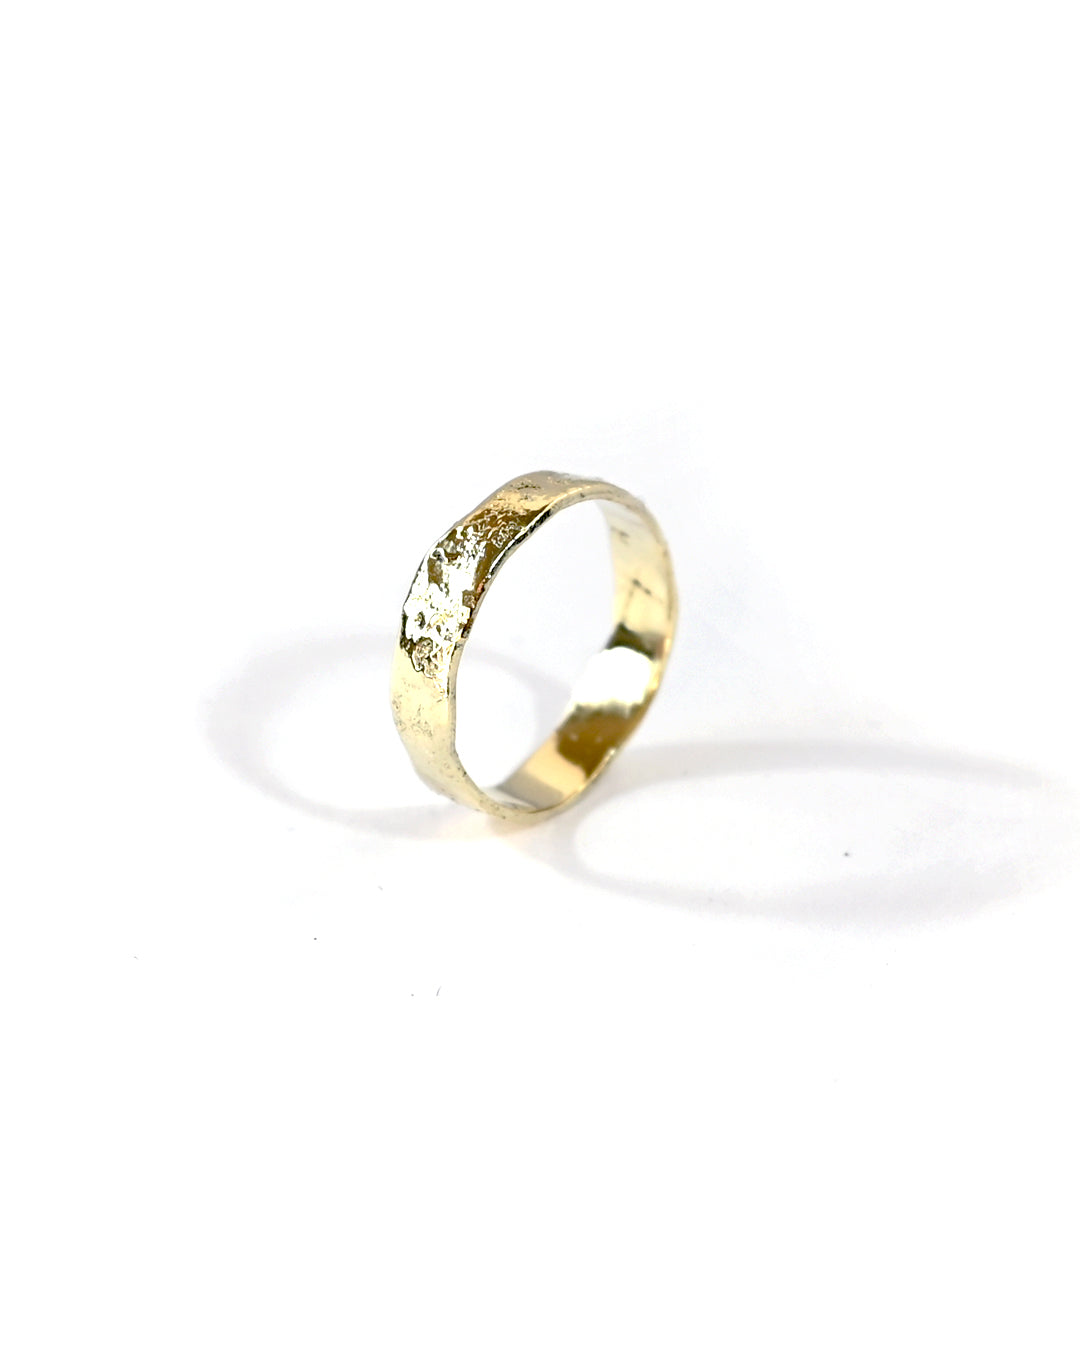 SEAWEED RING- Solid gold